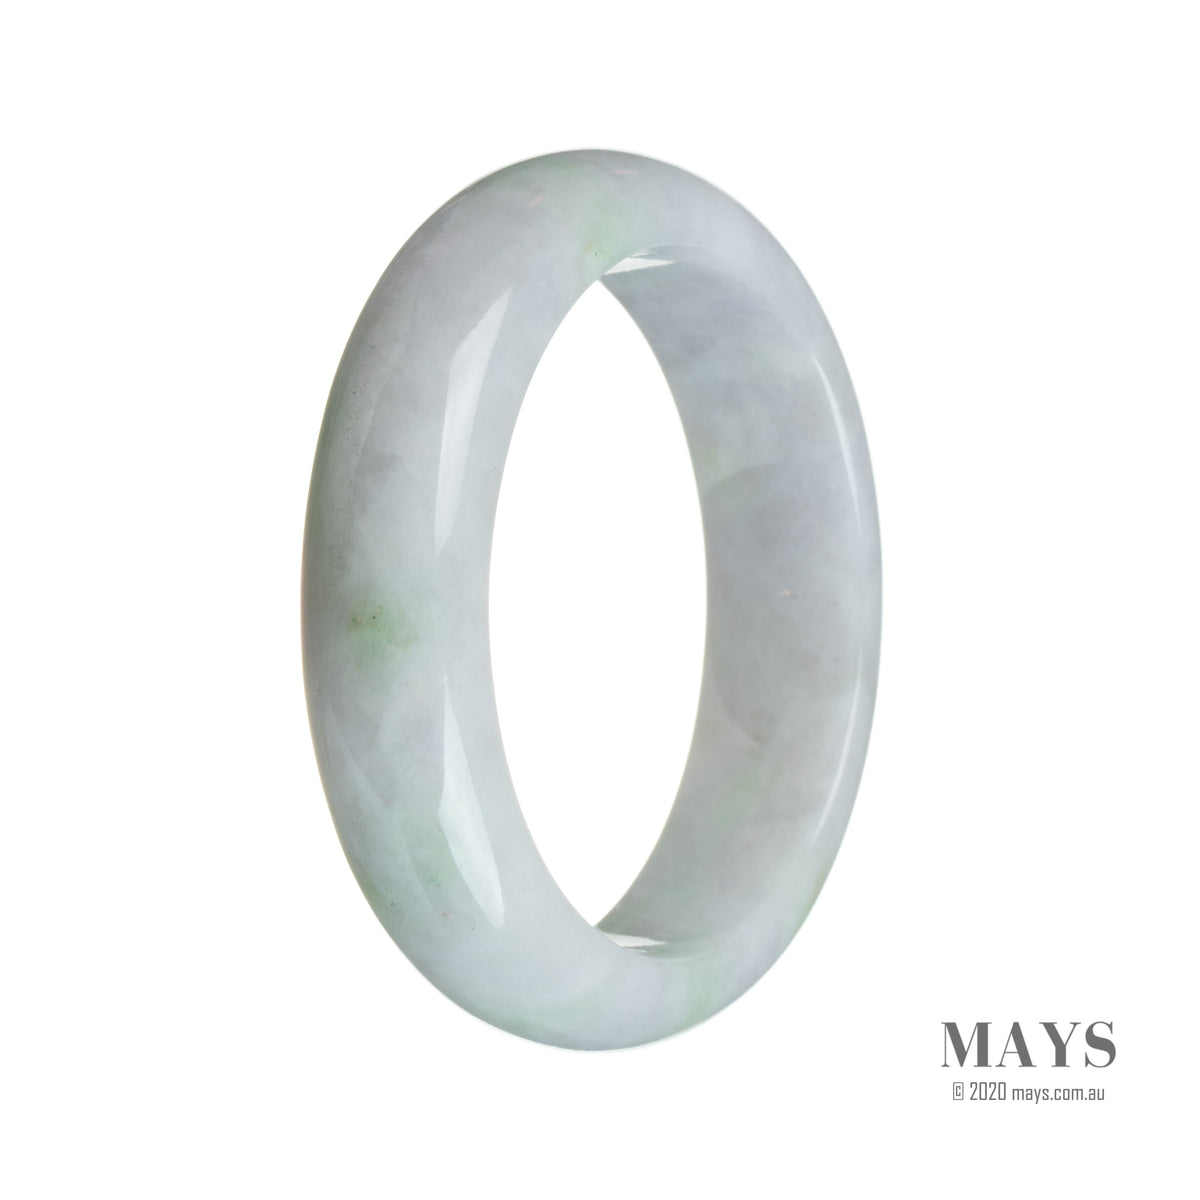 A close-up image of a beautiful lavender and green jadeite bracelet in a half moon shape.